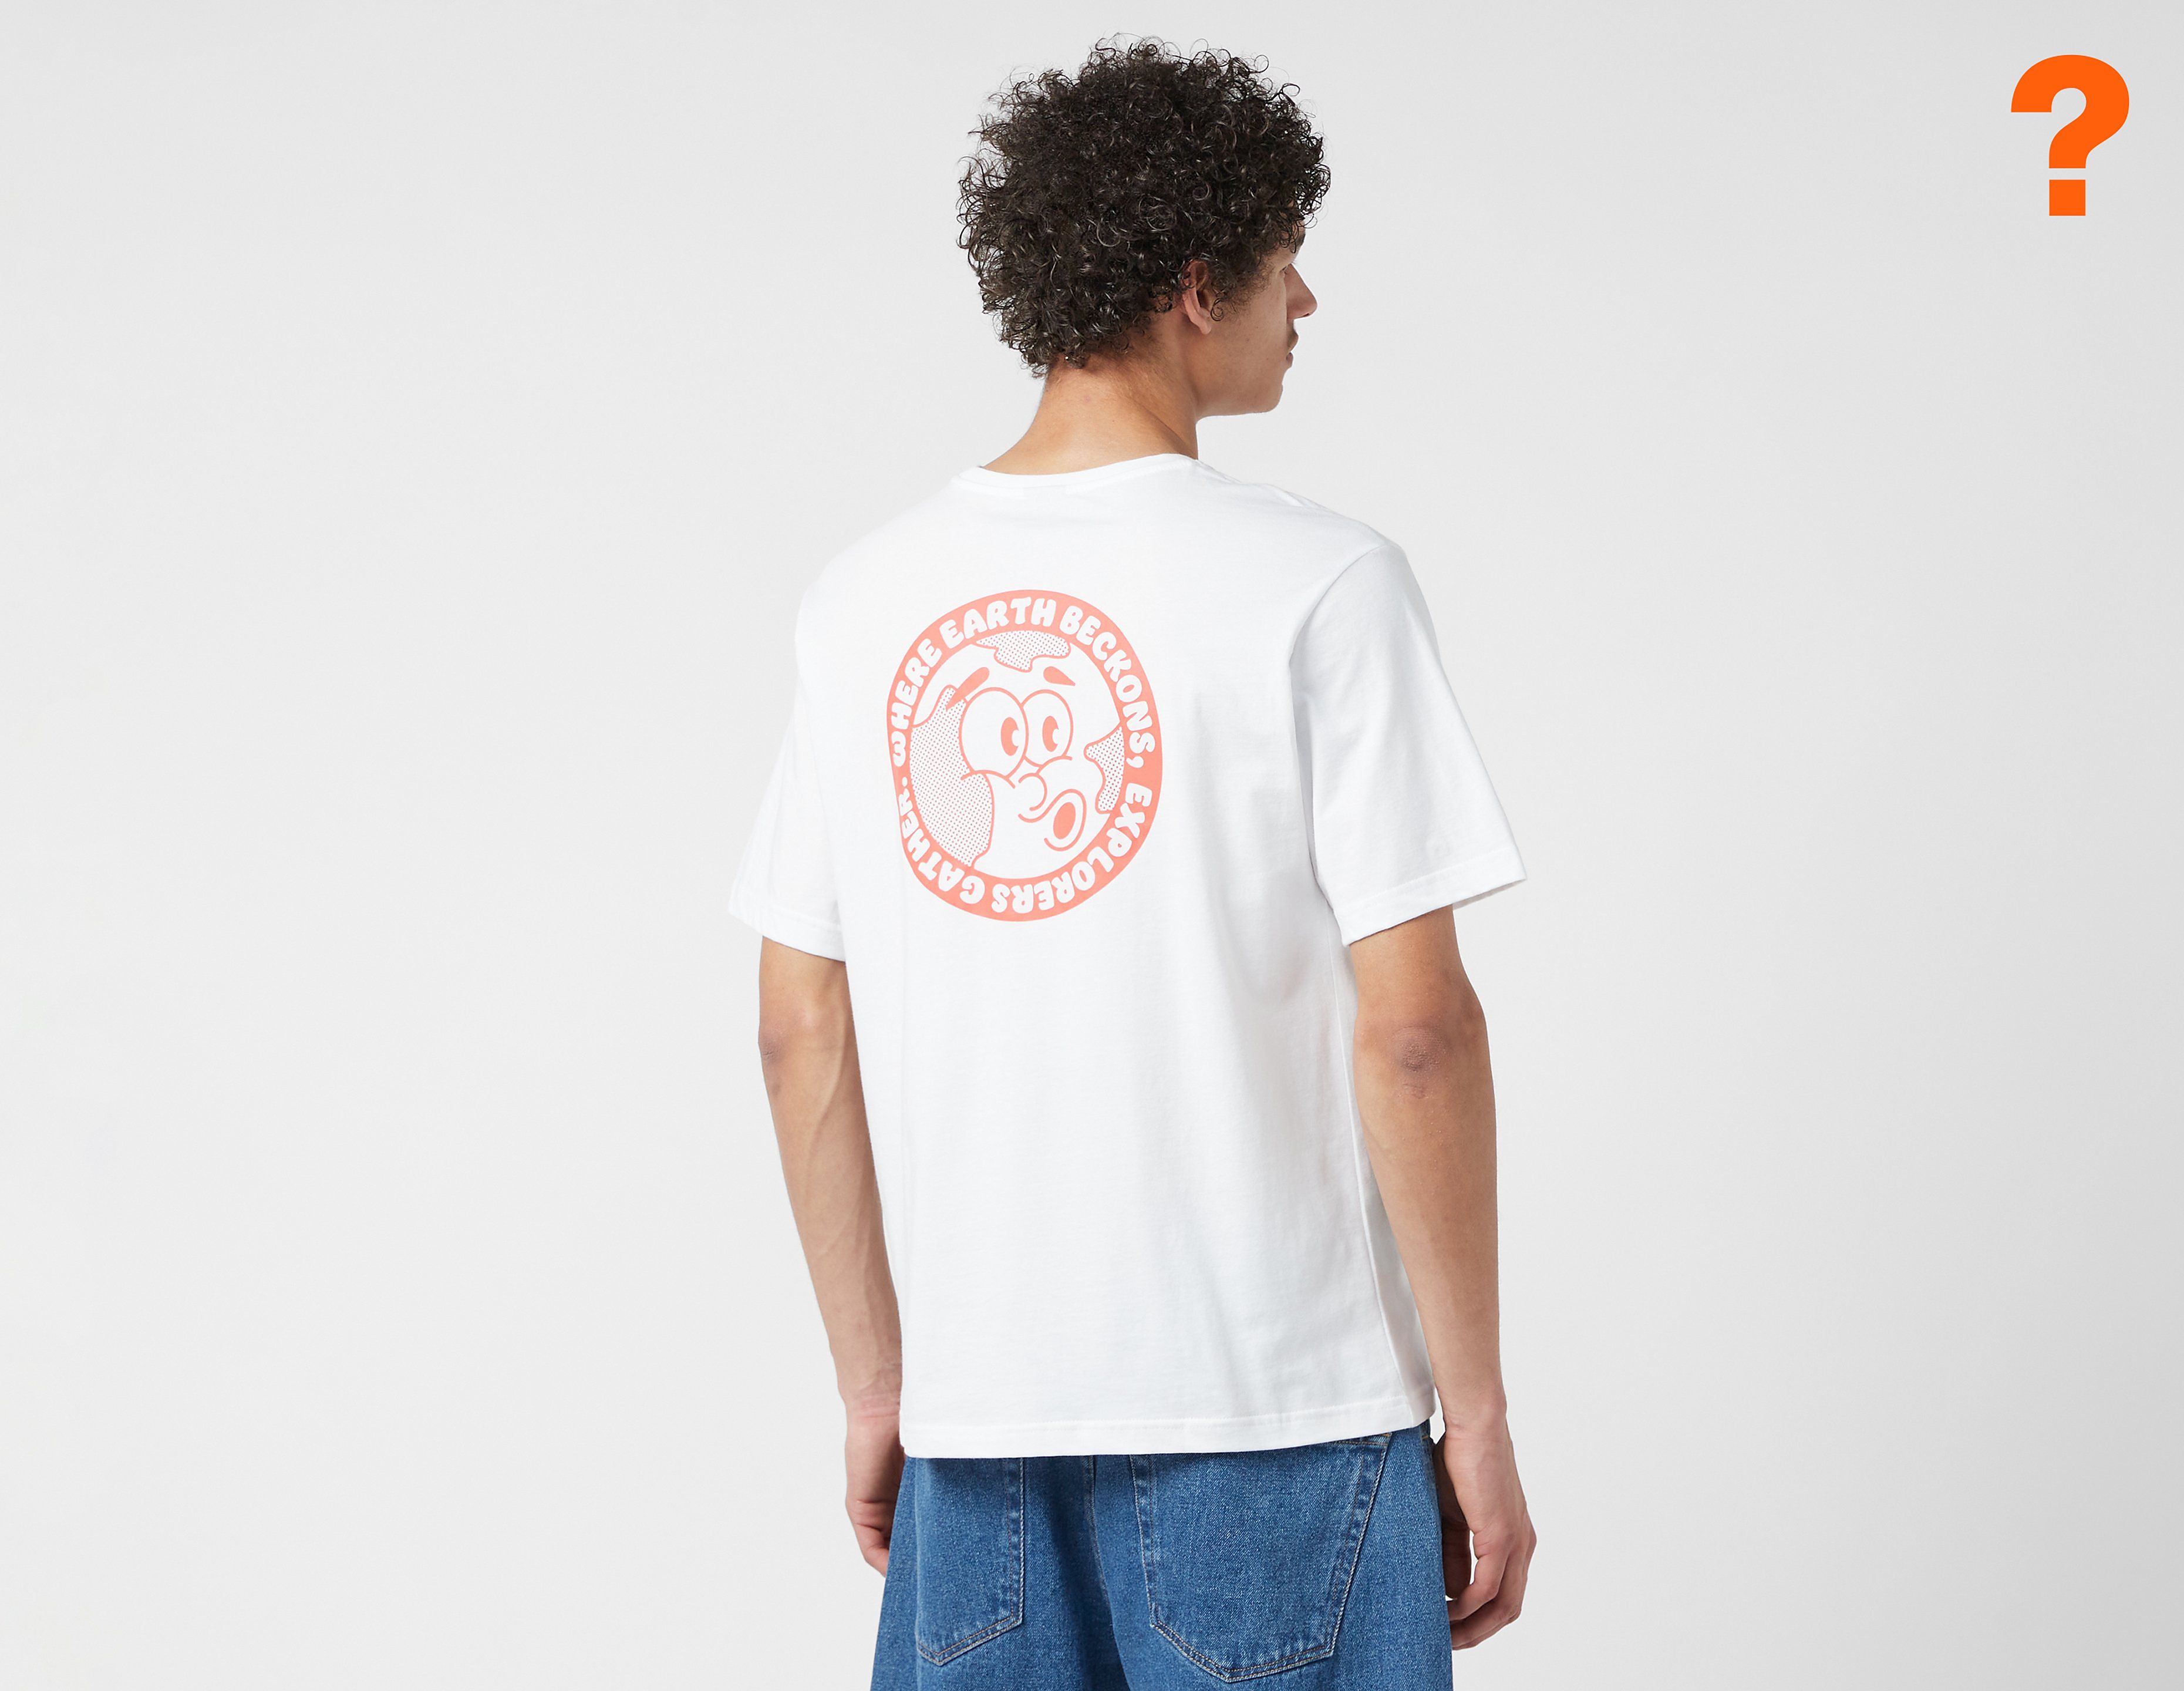 The North Face Retro Earth T-Shirt - size? exclusive, White